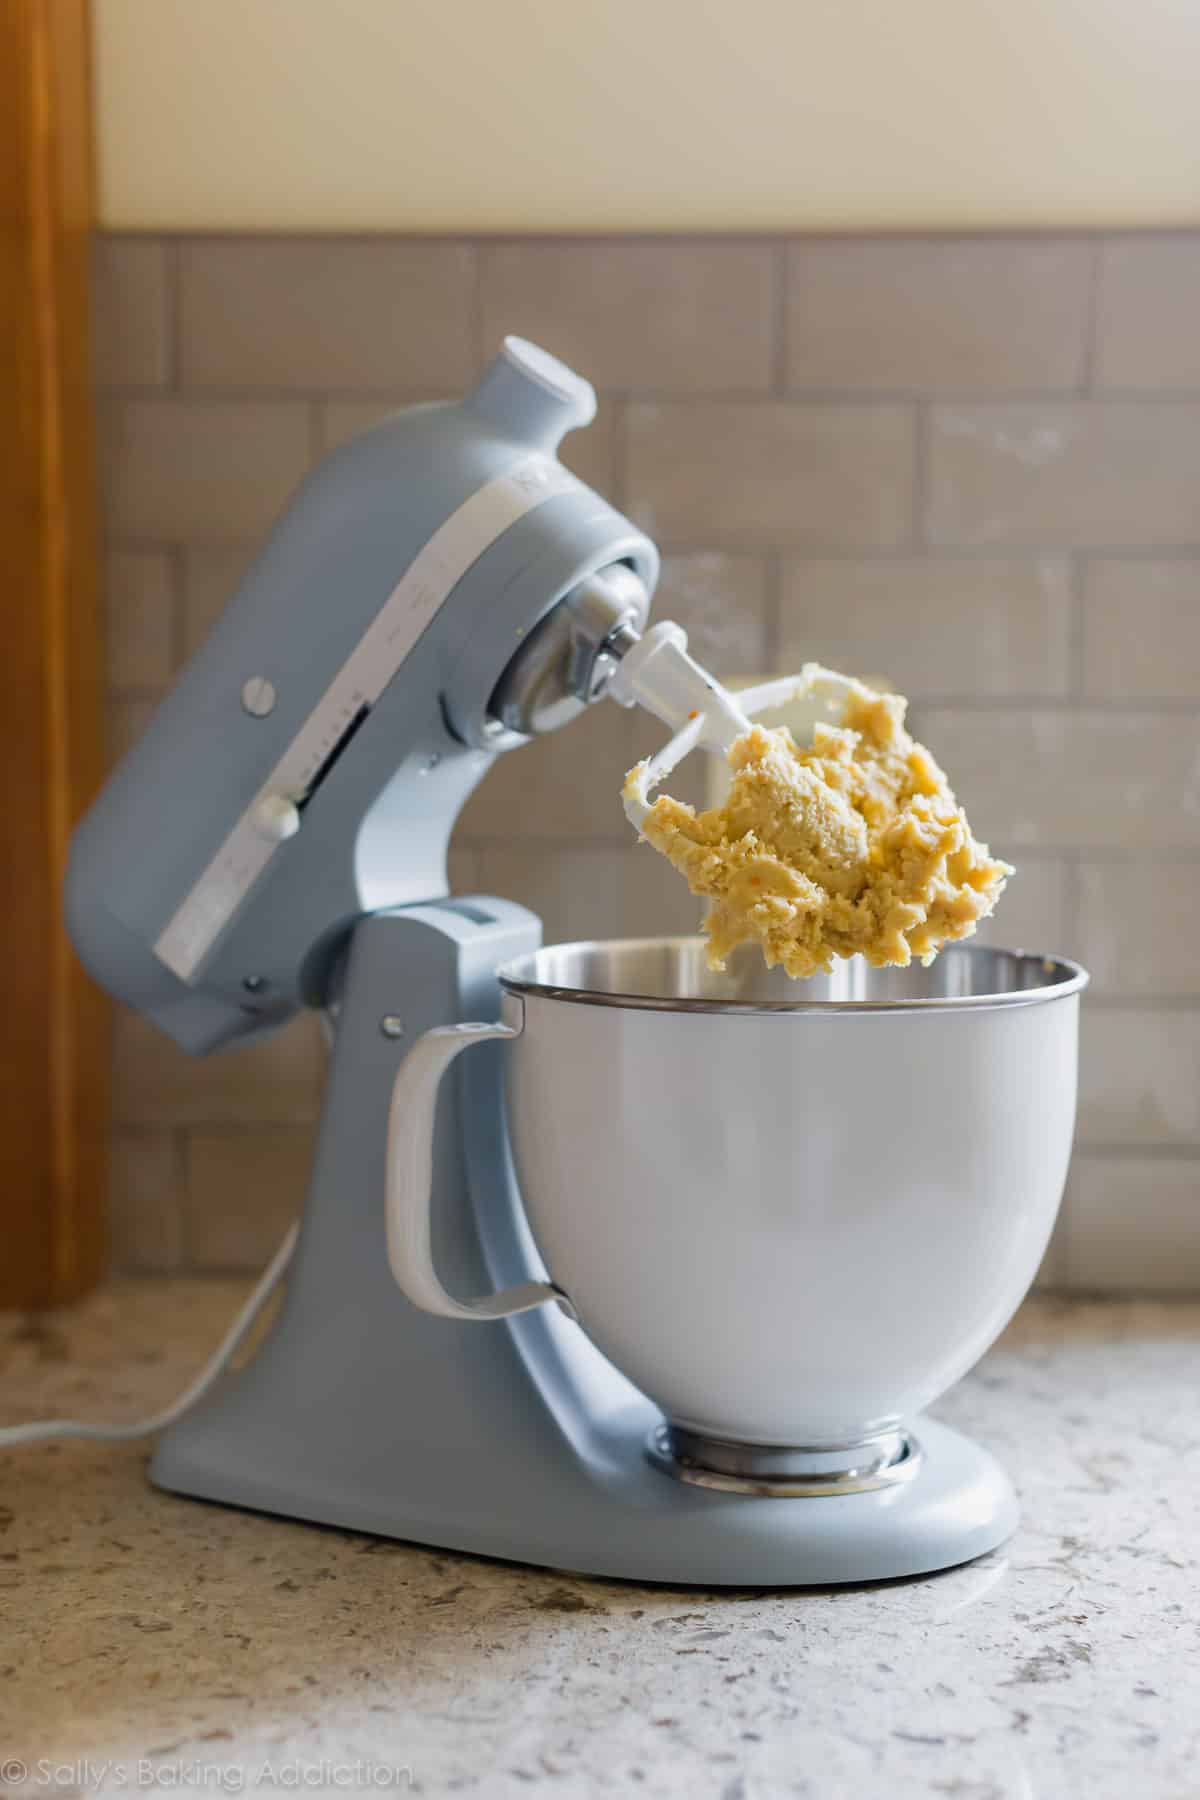 KitchenAid Misty Blue Stand Mixer with orange butter cookie dough